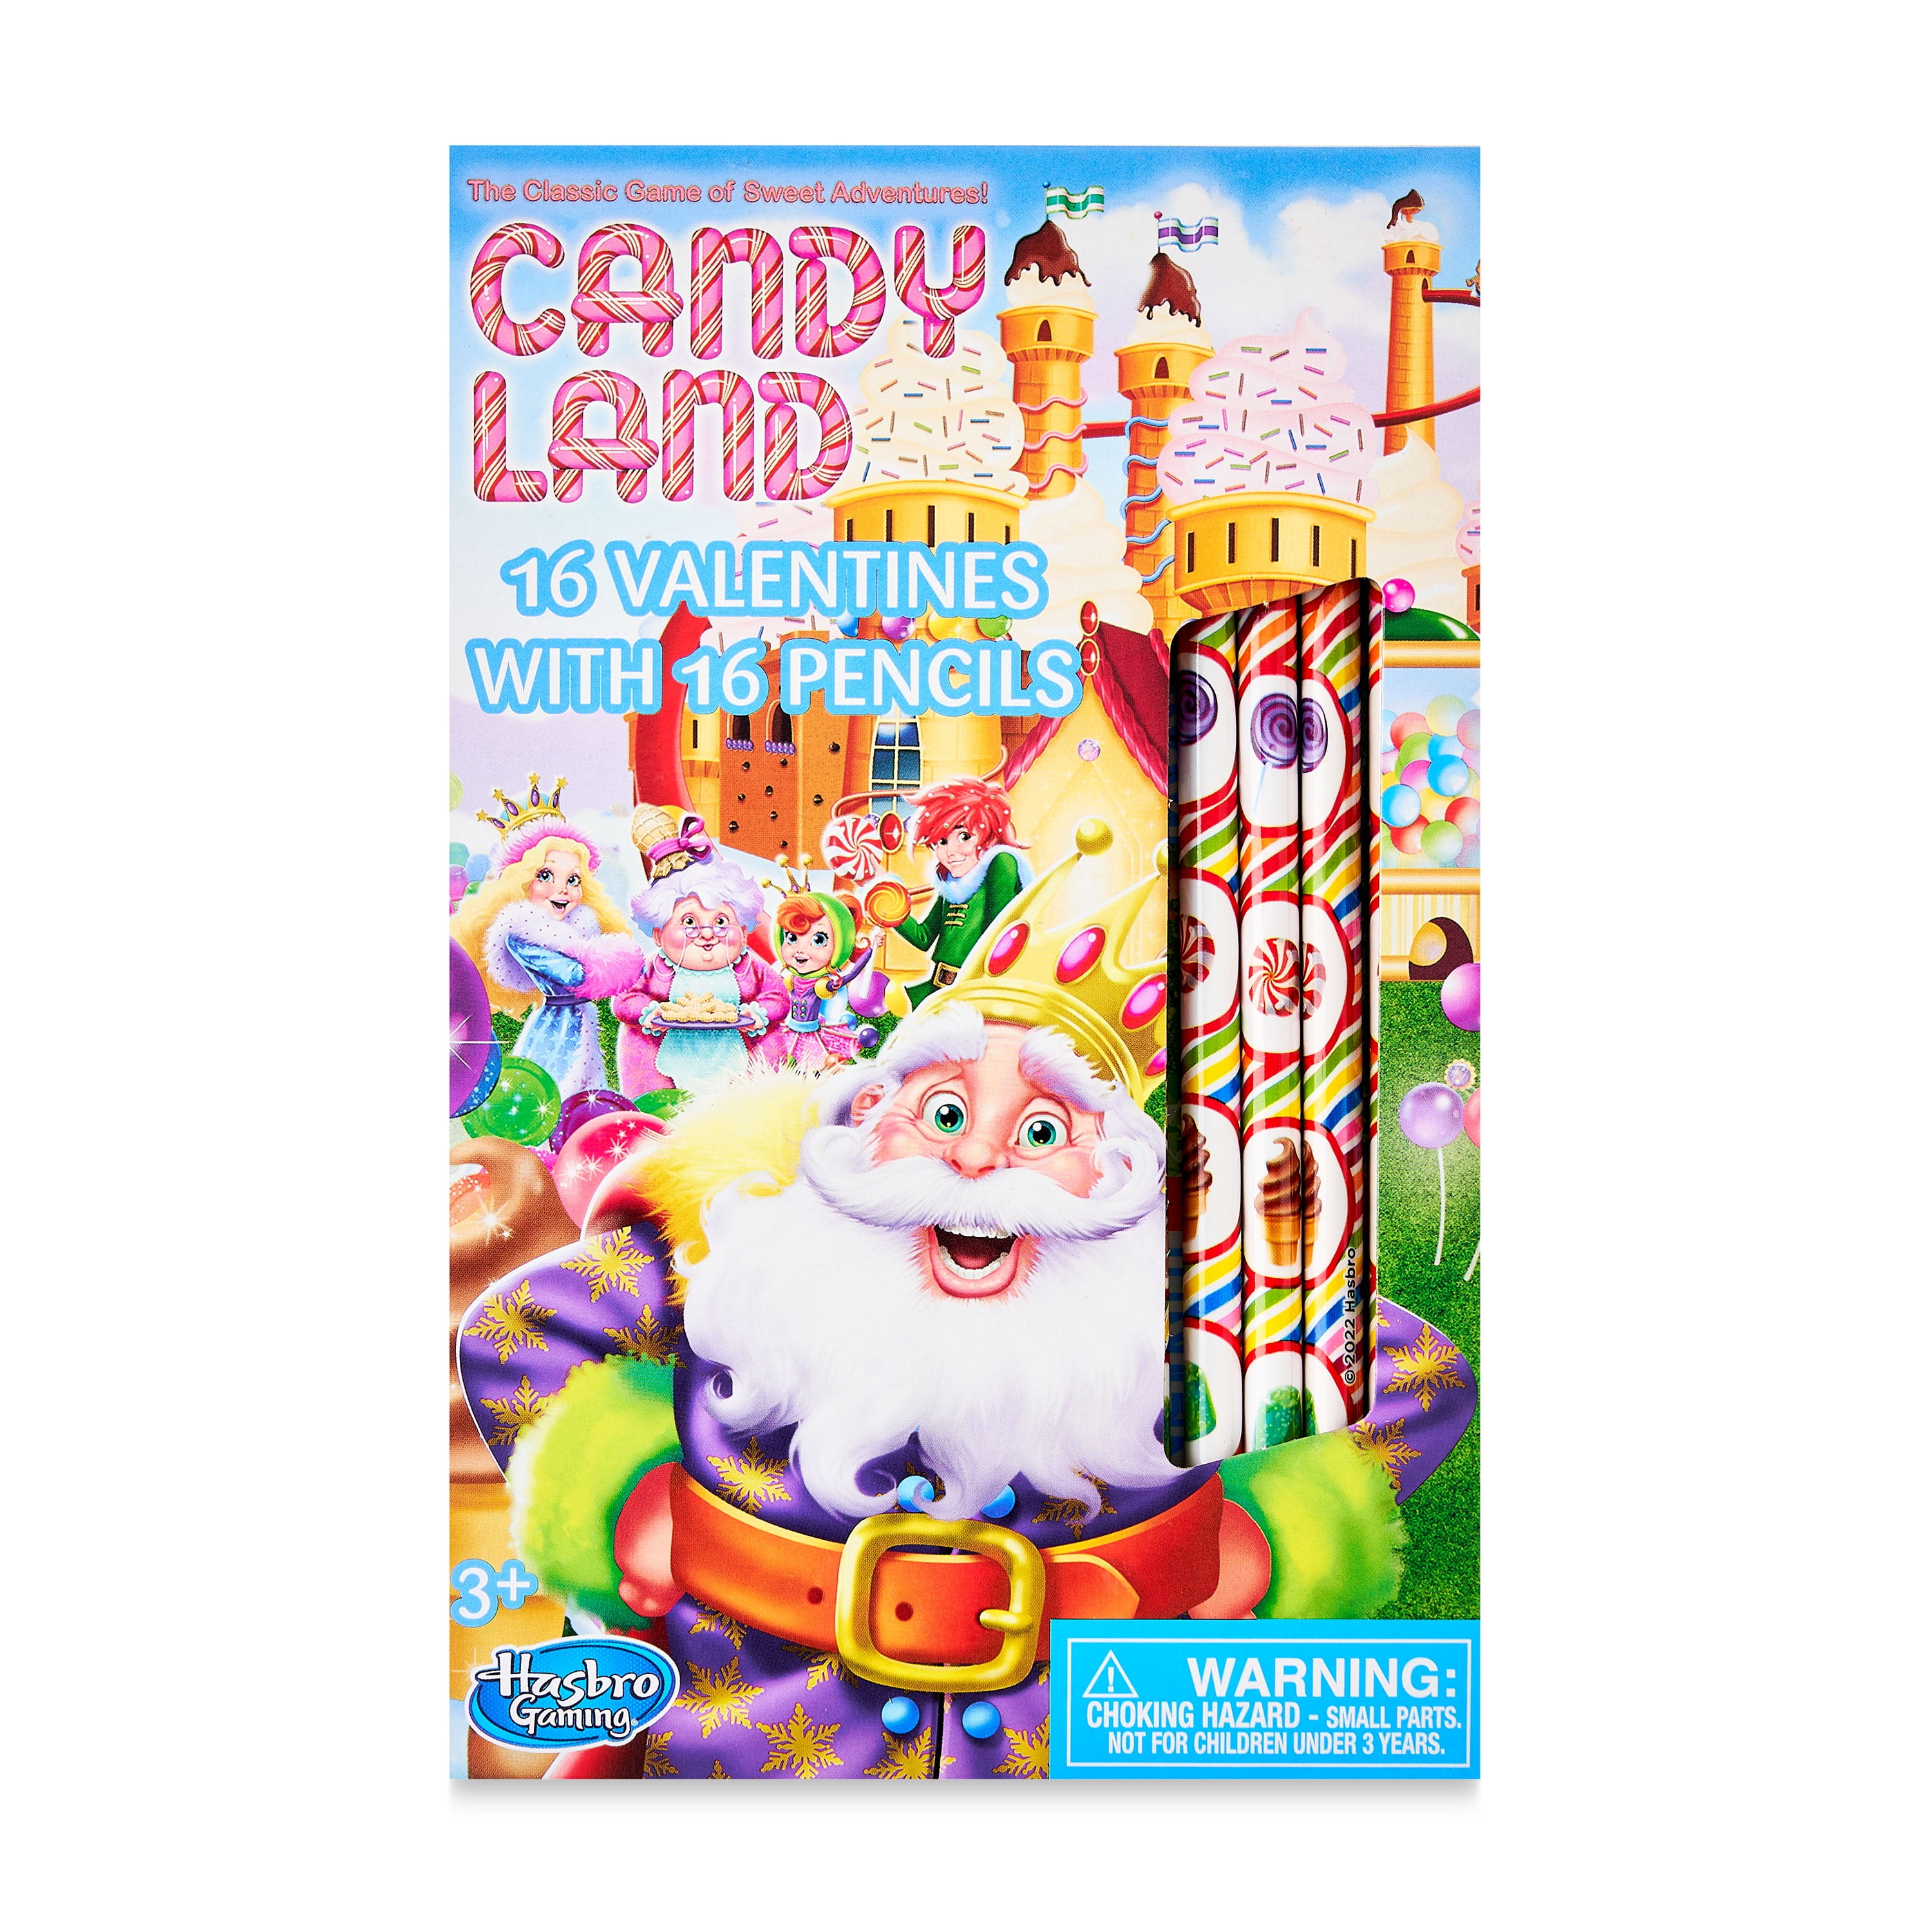 Paper Magic Group Way To Celebrate Candyland Valentine's Day Cards, 16 Count, Multi-Color Classroom Exchange Cards, 16 Full Size Pencils